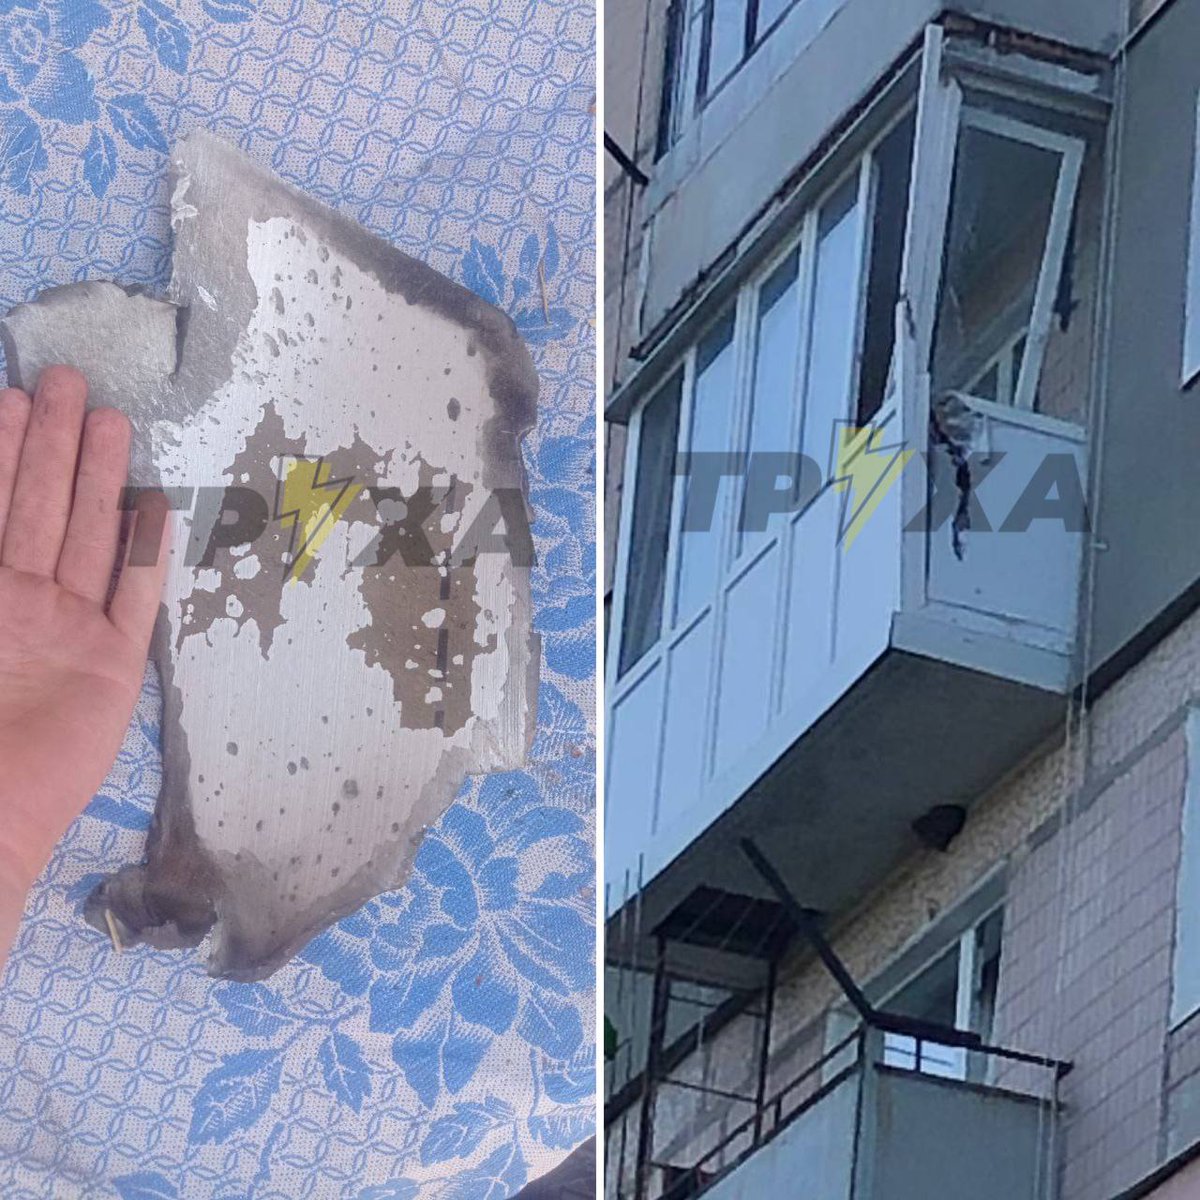 Damage in Kropivnitsky after Russian missile strikes overnight